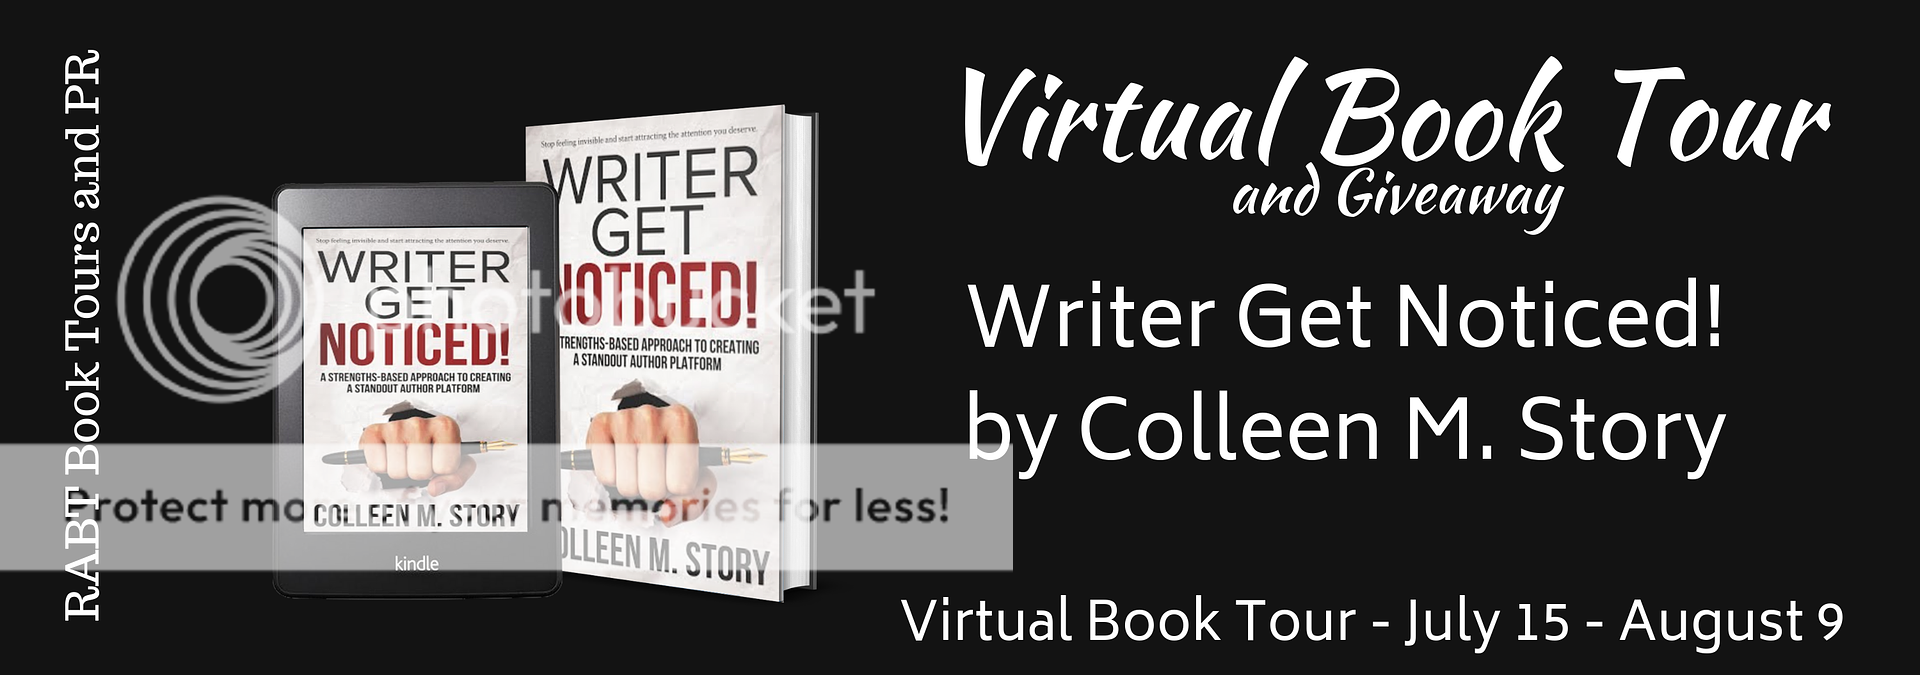 Virtual Book Tour: Writer Get Noticed! by Colleen M. Story #nonfiction #interview #blogtour #giveaway @colleen_m_story @RABTBookTours